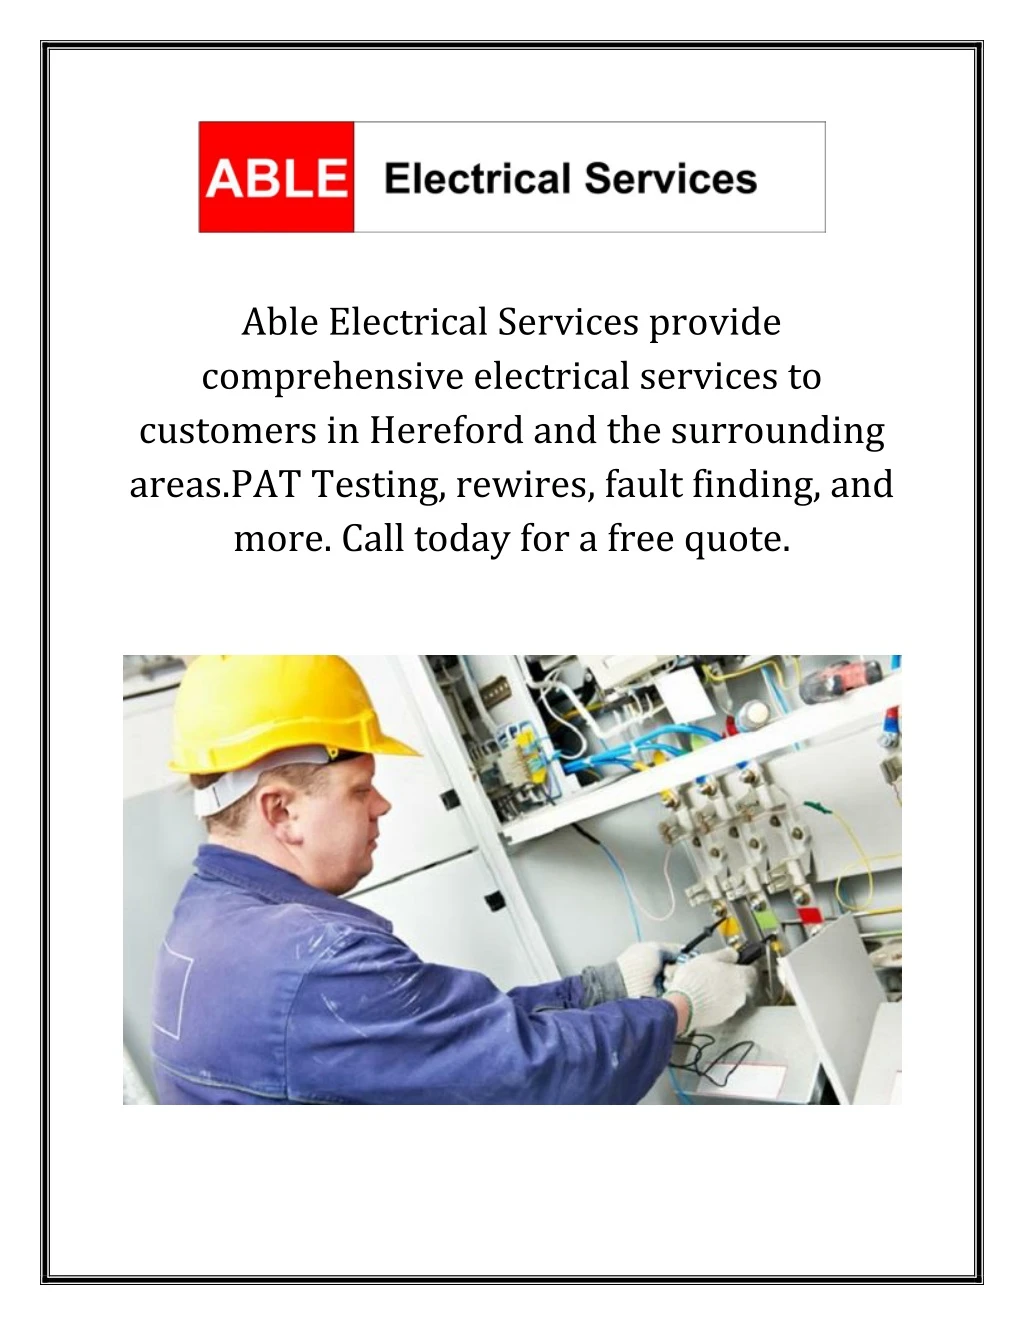 able electrical services provide comprehensive